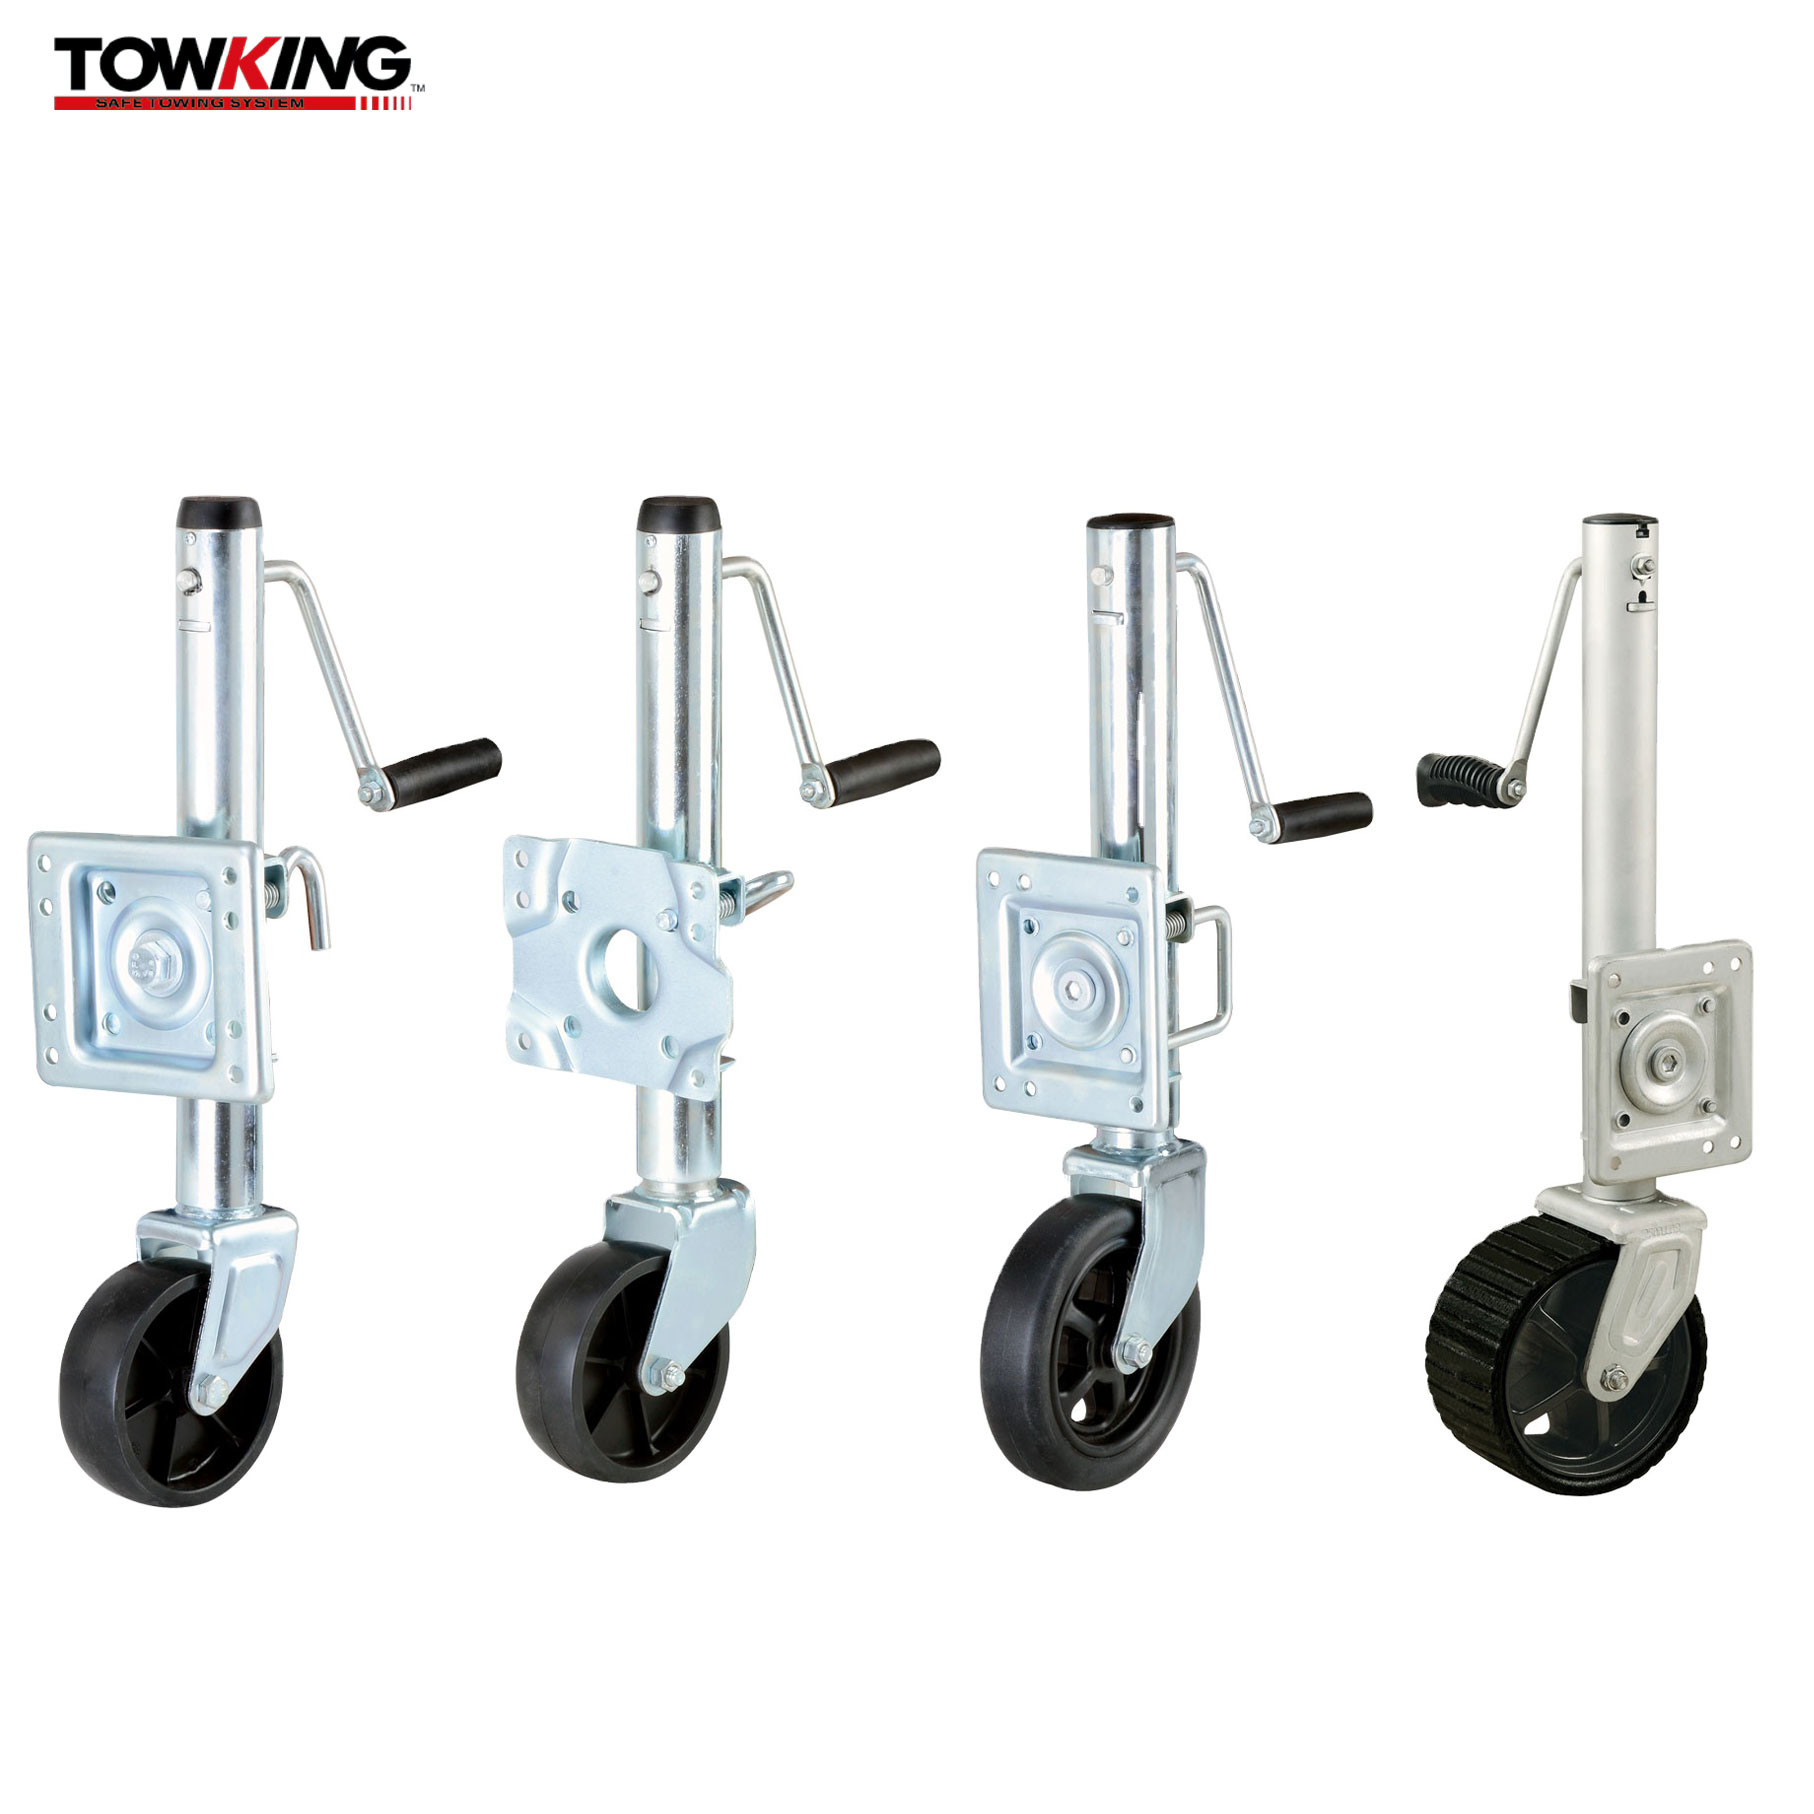 Buy TOWKING 1000lbs Capacity Boat Trailer Tire Change Jack Corrosion Resistant at wholesale prices